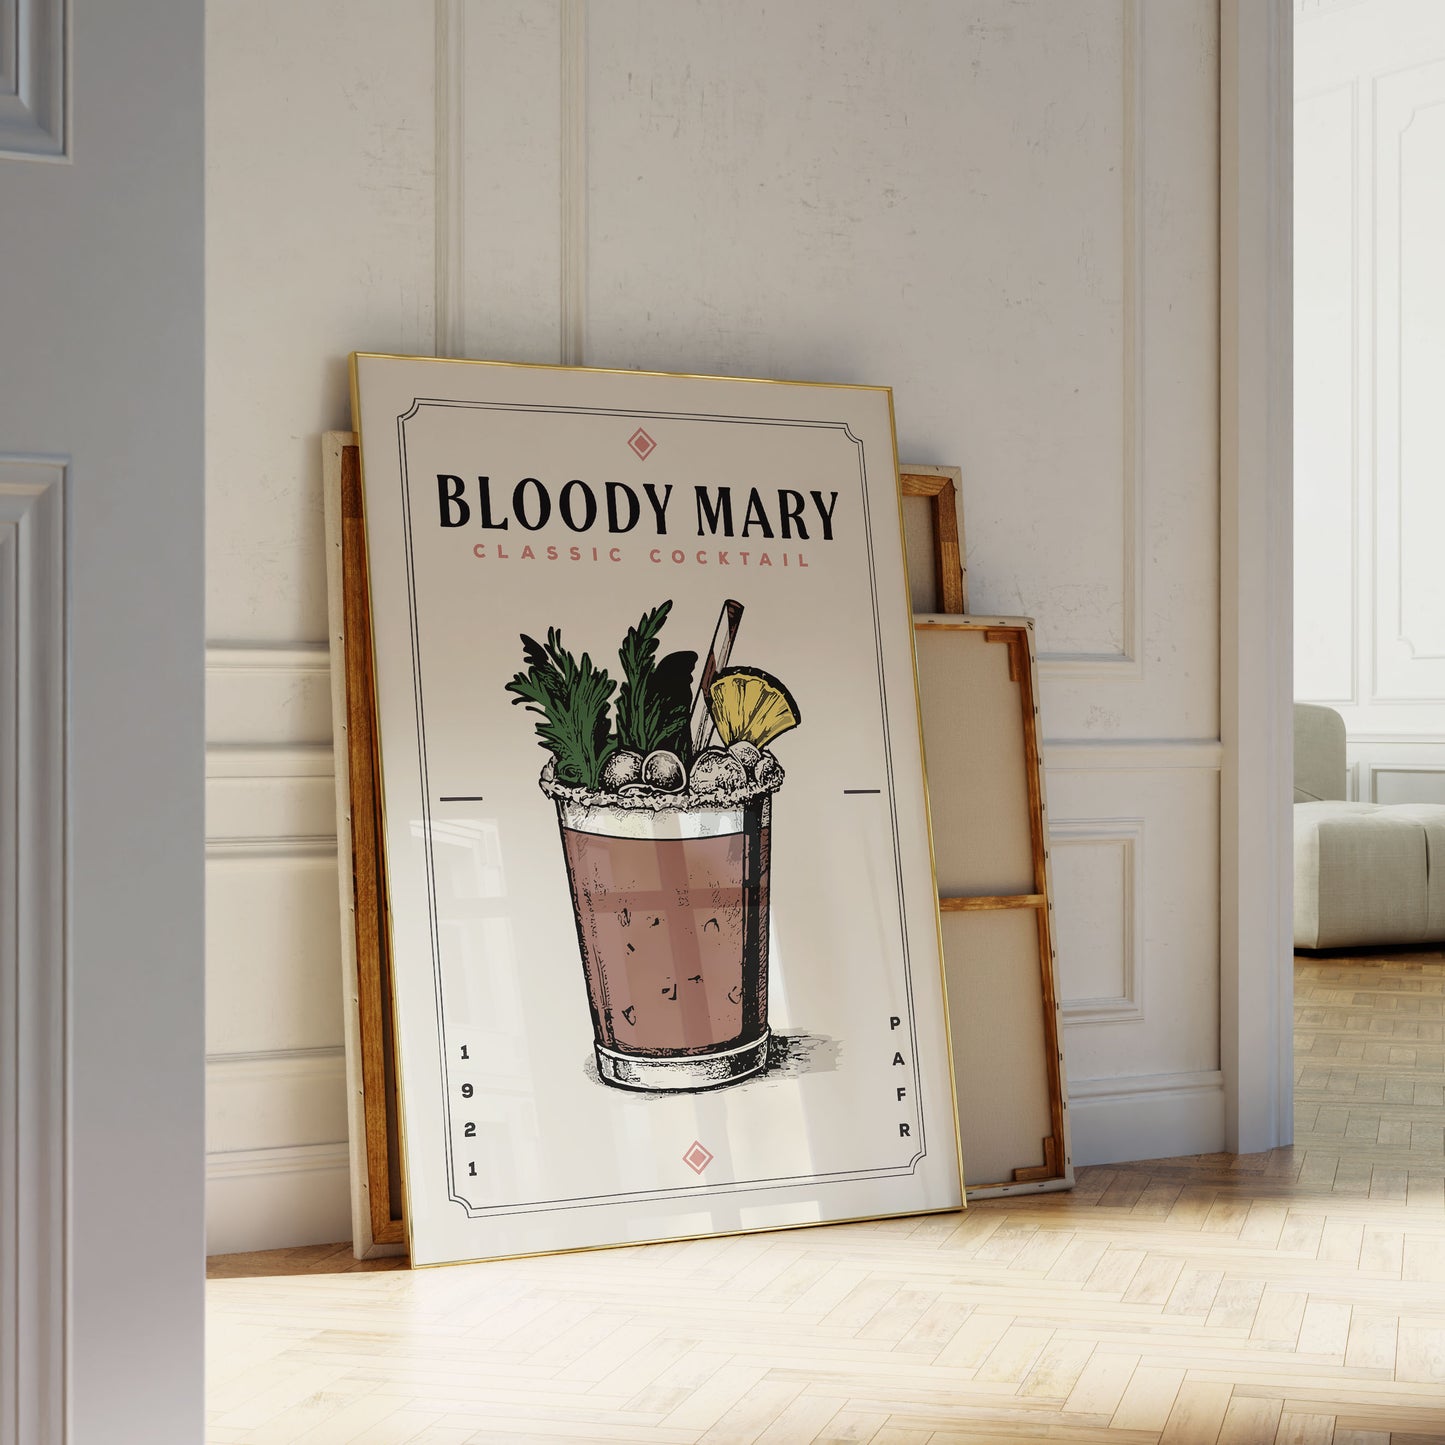 Bloody Mary - Minimalist Cocktail Poster